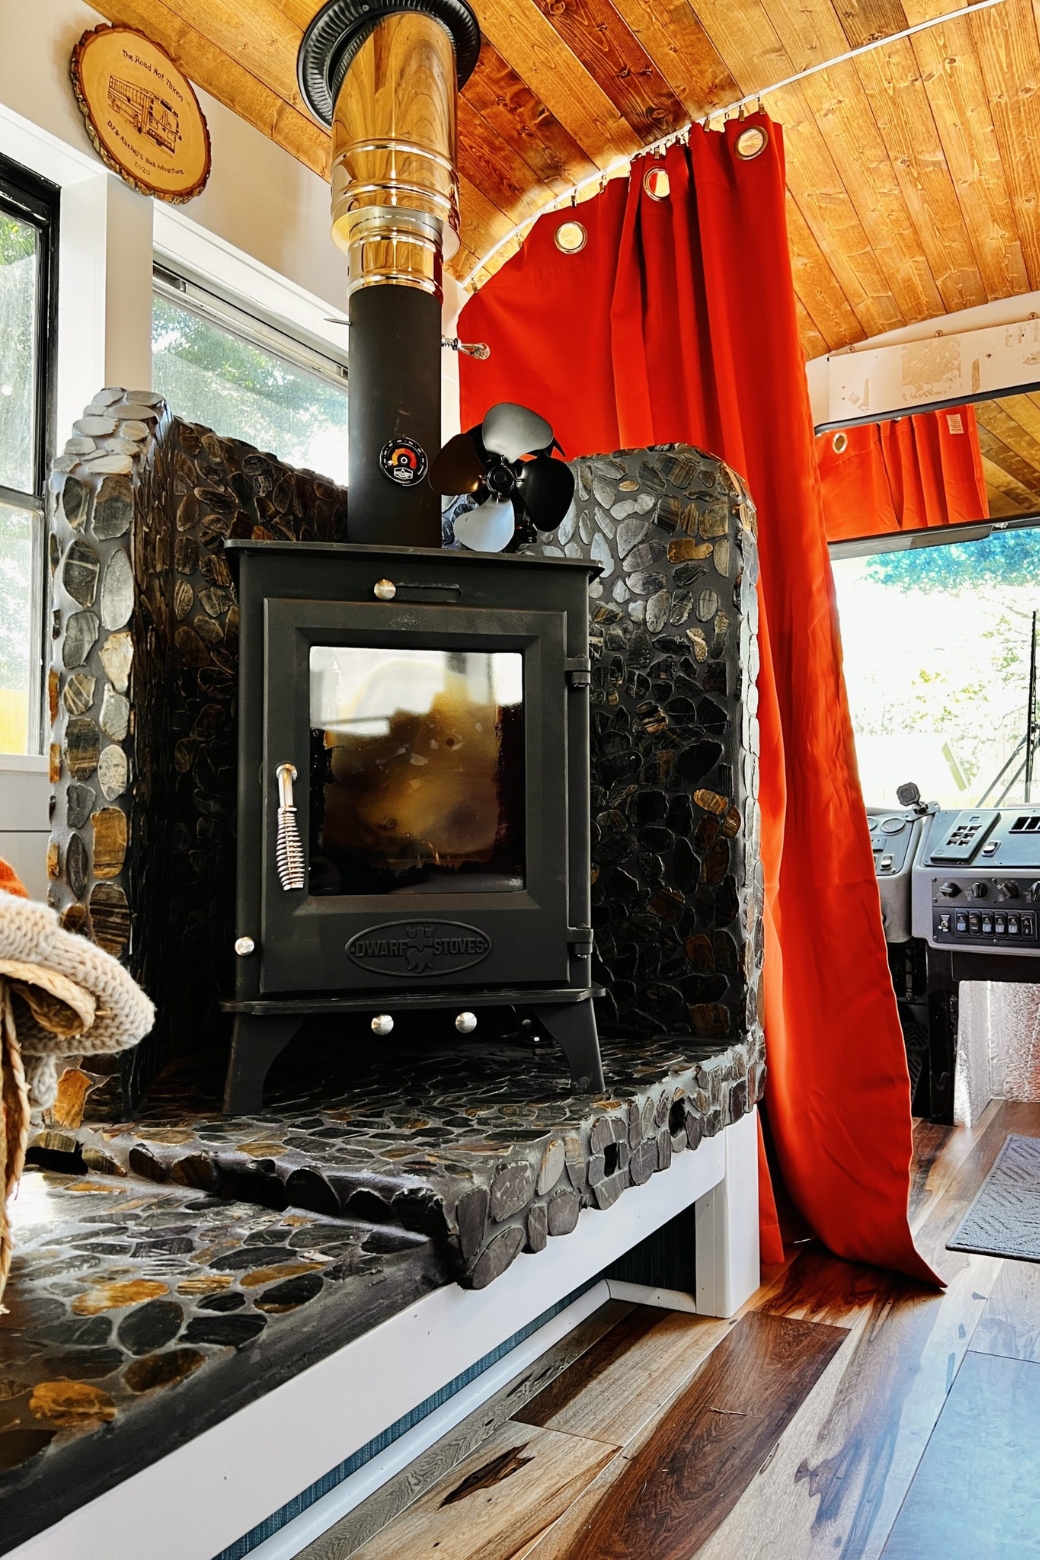 who is the Dwarf tiny wood stove best for